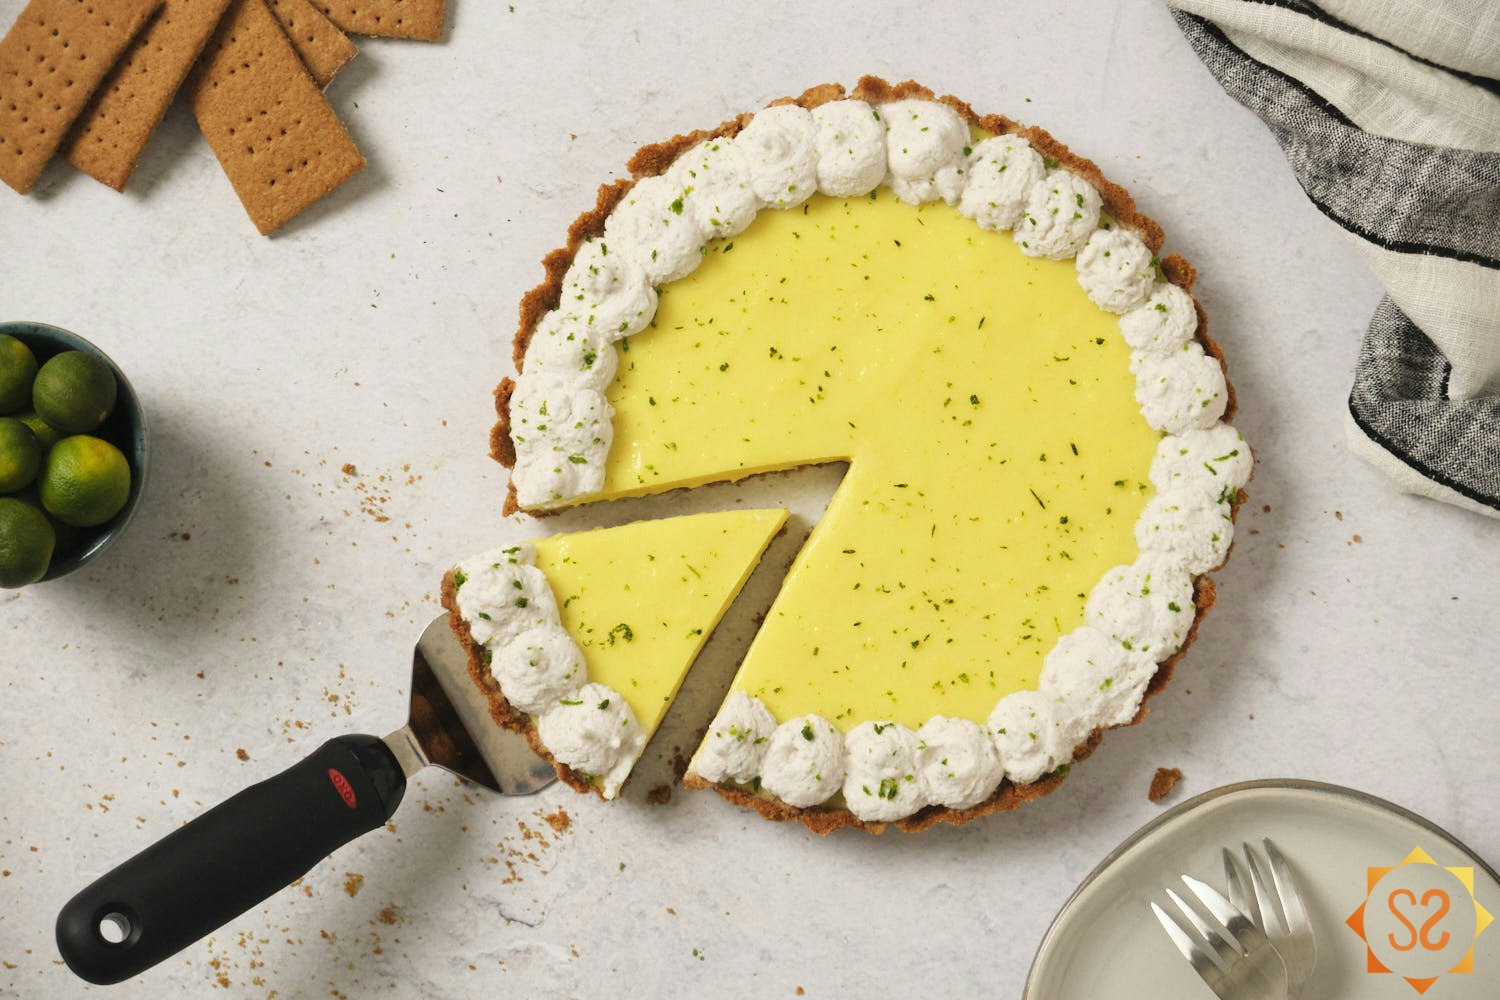 A vegan Key lime pie with a slice being removed, surrounded by graham crackers, a bowl of Key limes, and plates and forks.